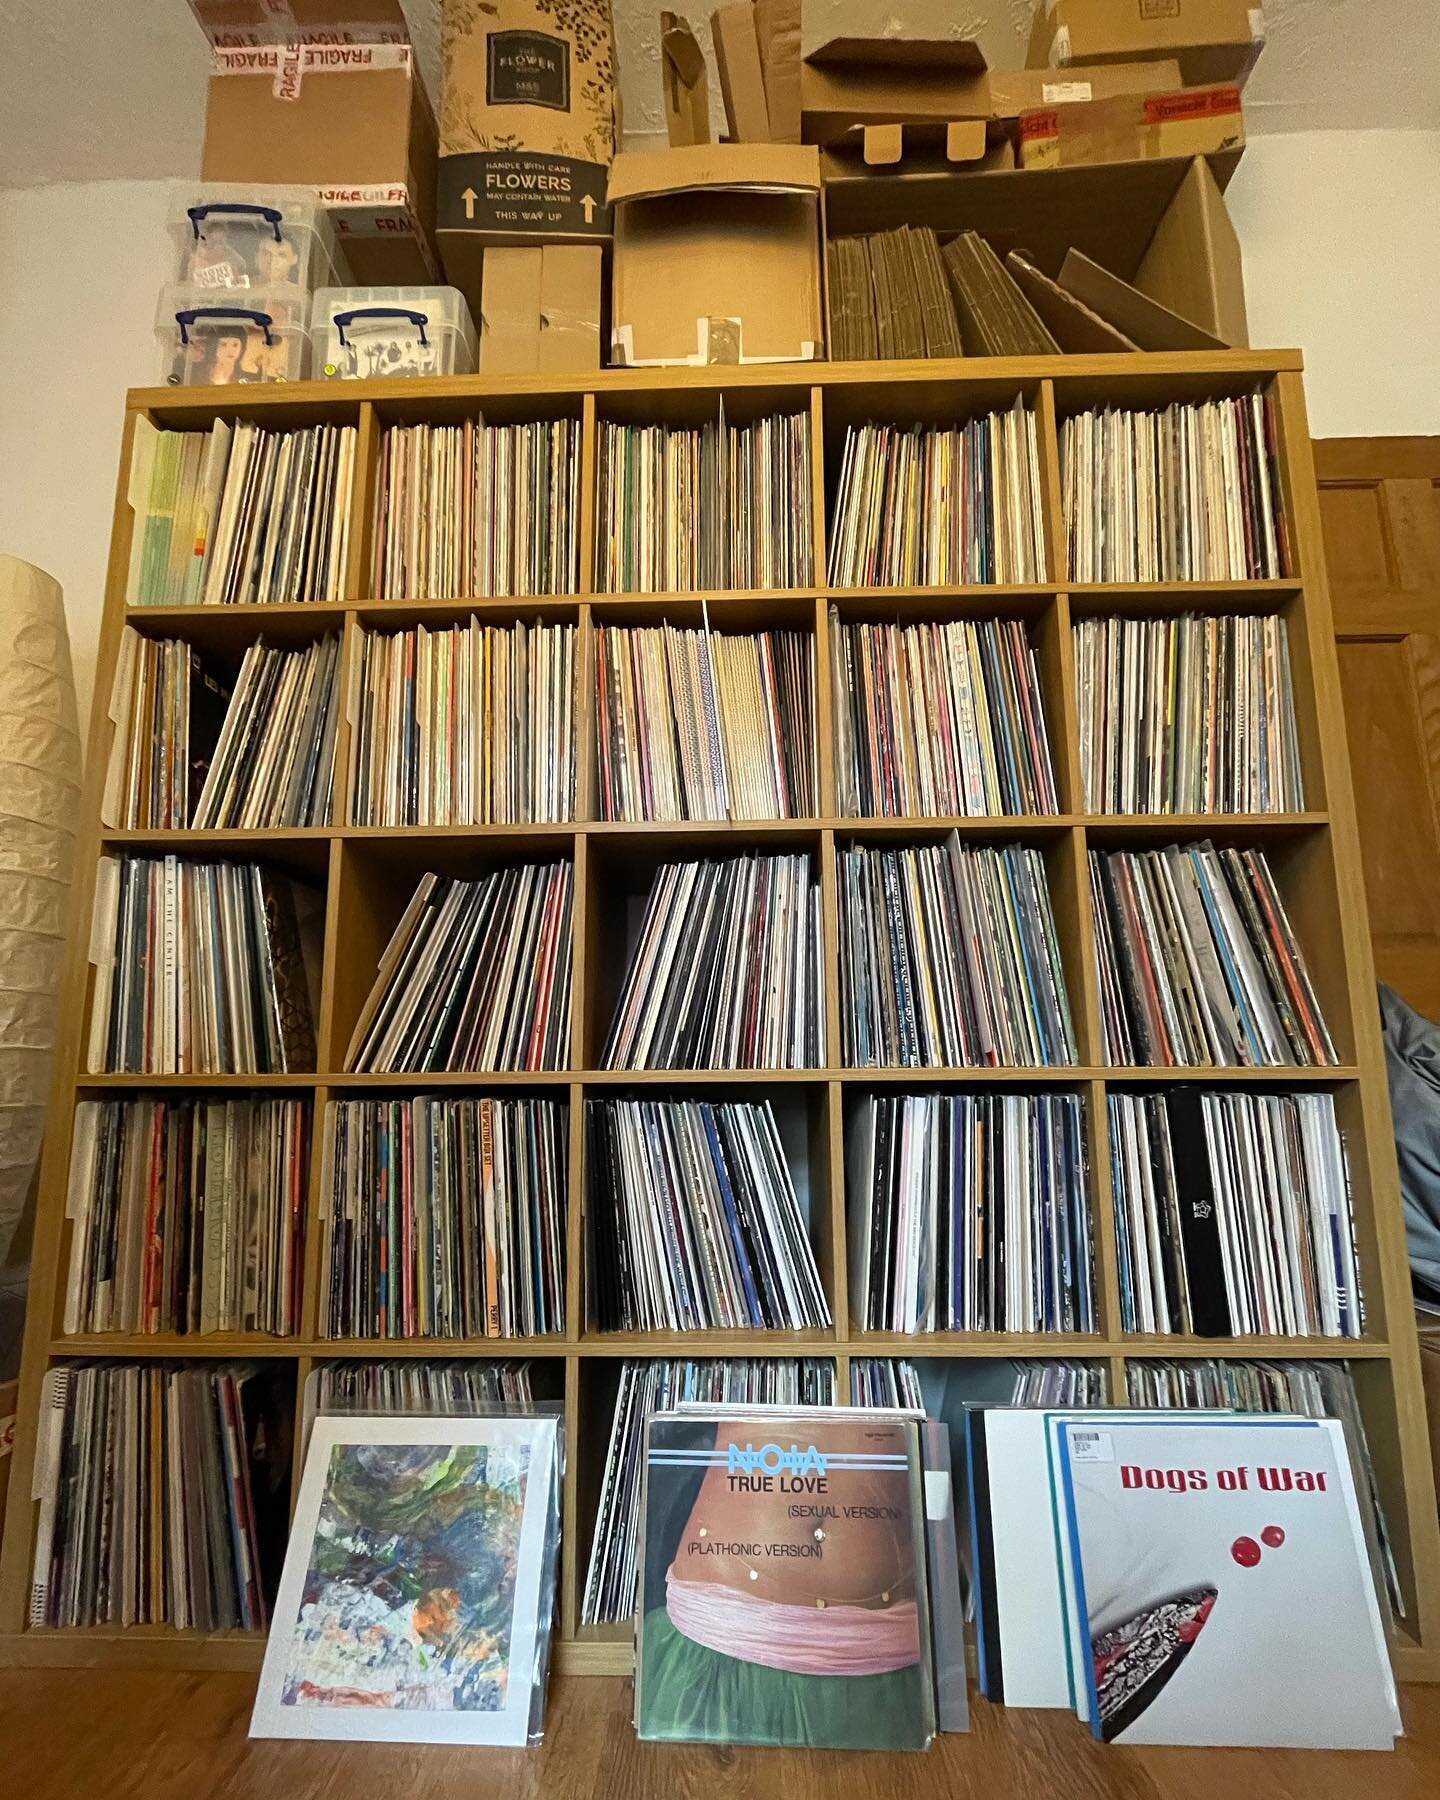 Tip. Stack cardboard boxes on top of record shelves to make it look more impressive.